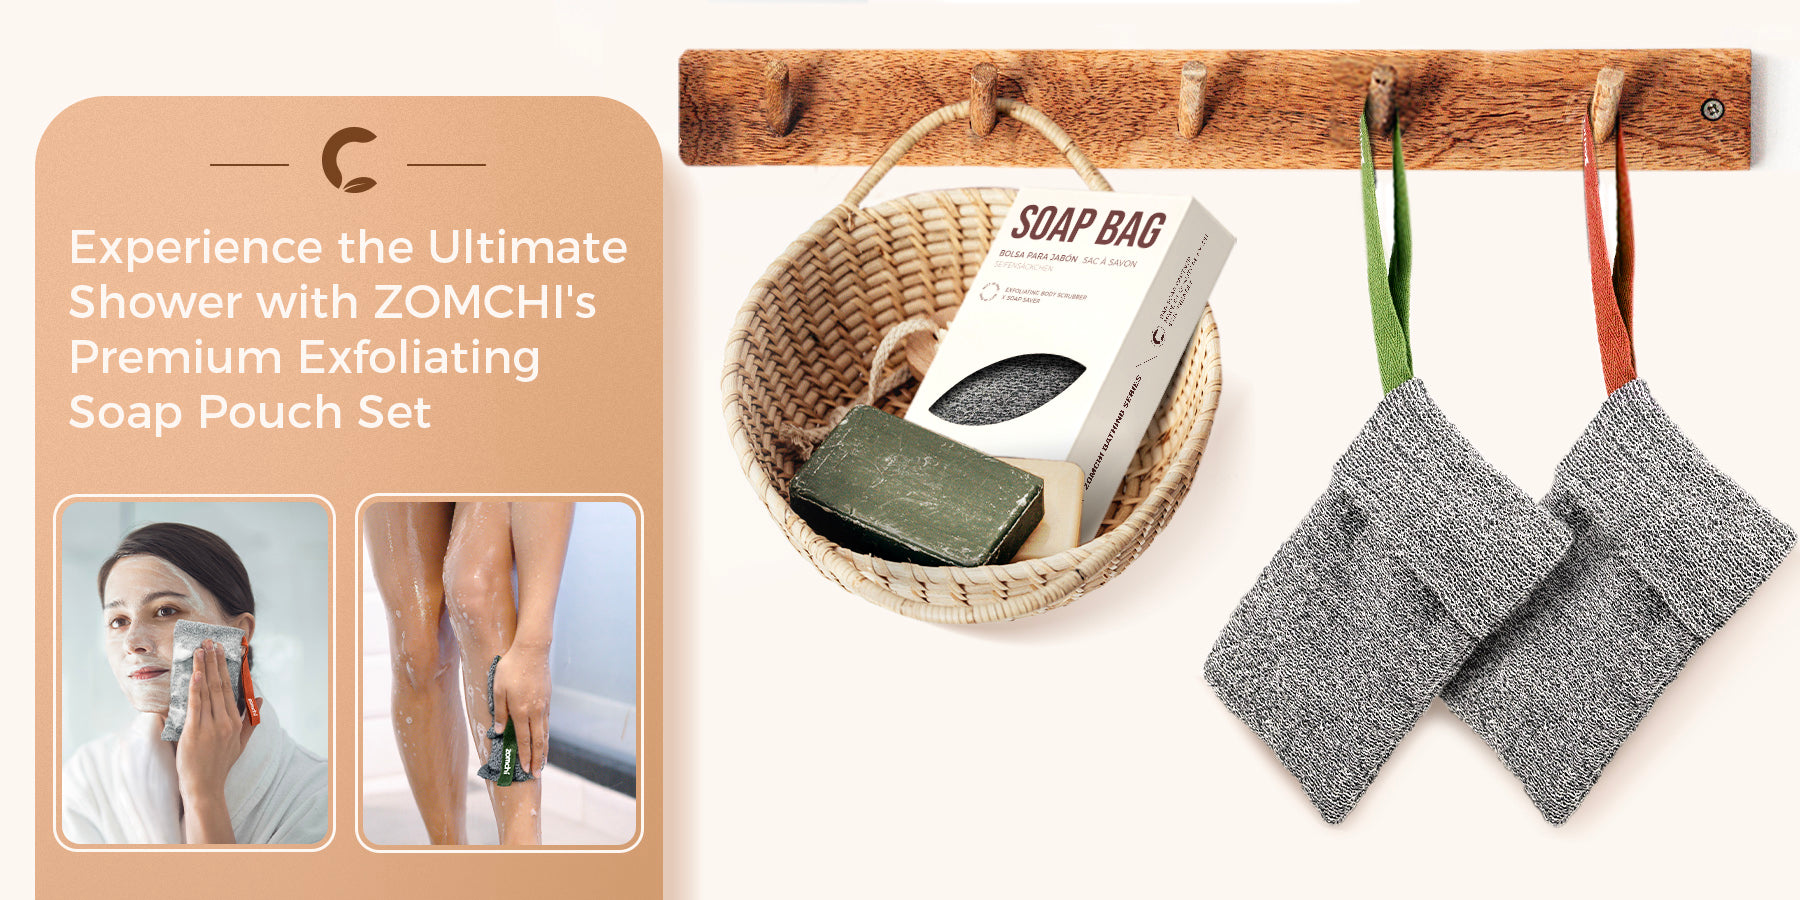 Experience the Ultimate Shower with ZOMCHI's Premium Exfoliating Soap Pouch Set